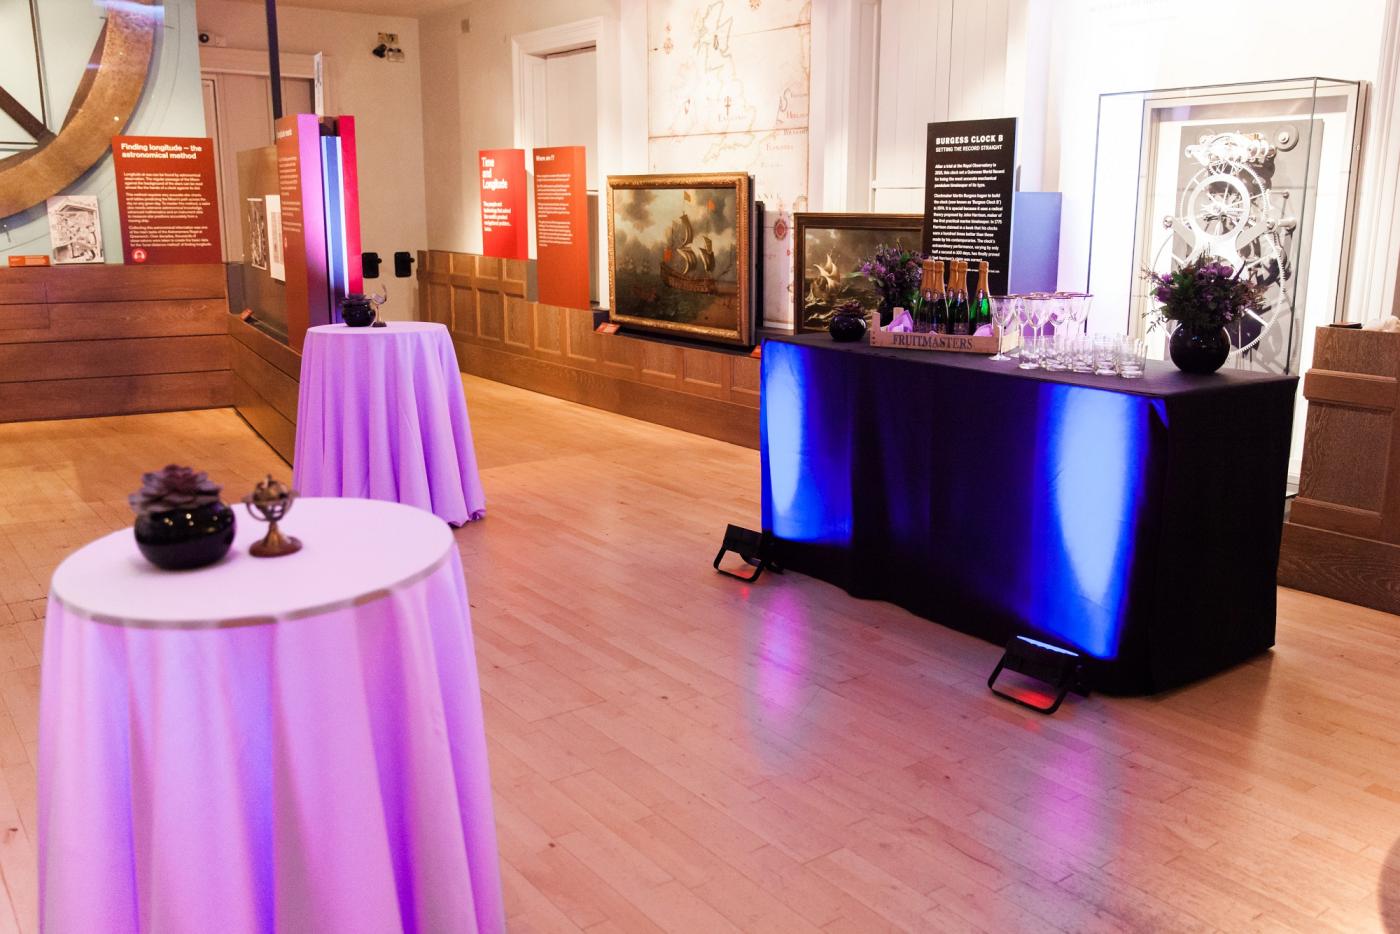 An image showing 'Time and Longitude Gallery bar set up'